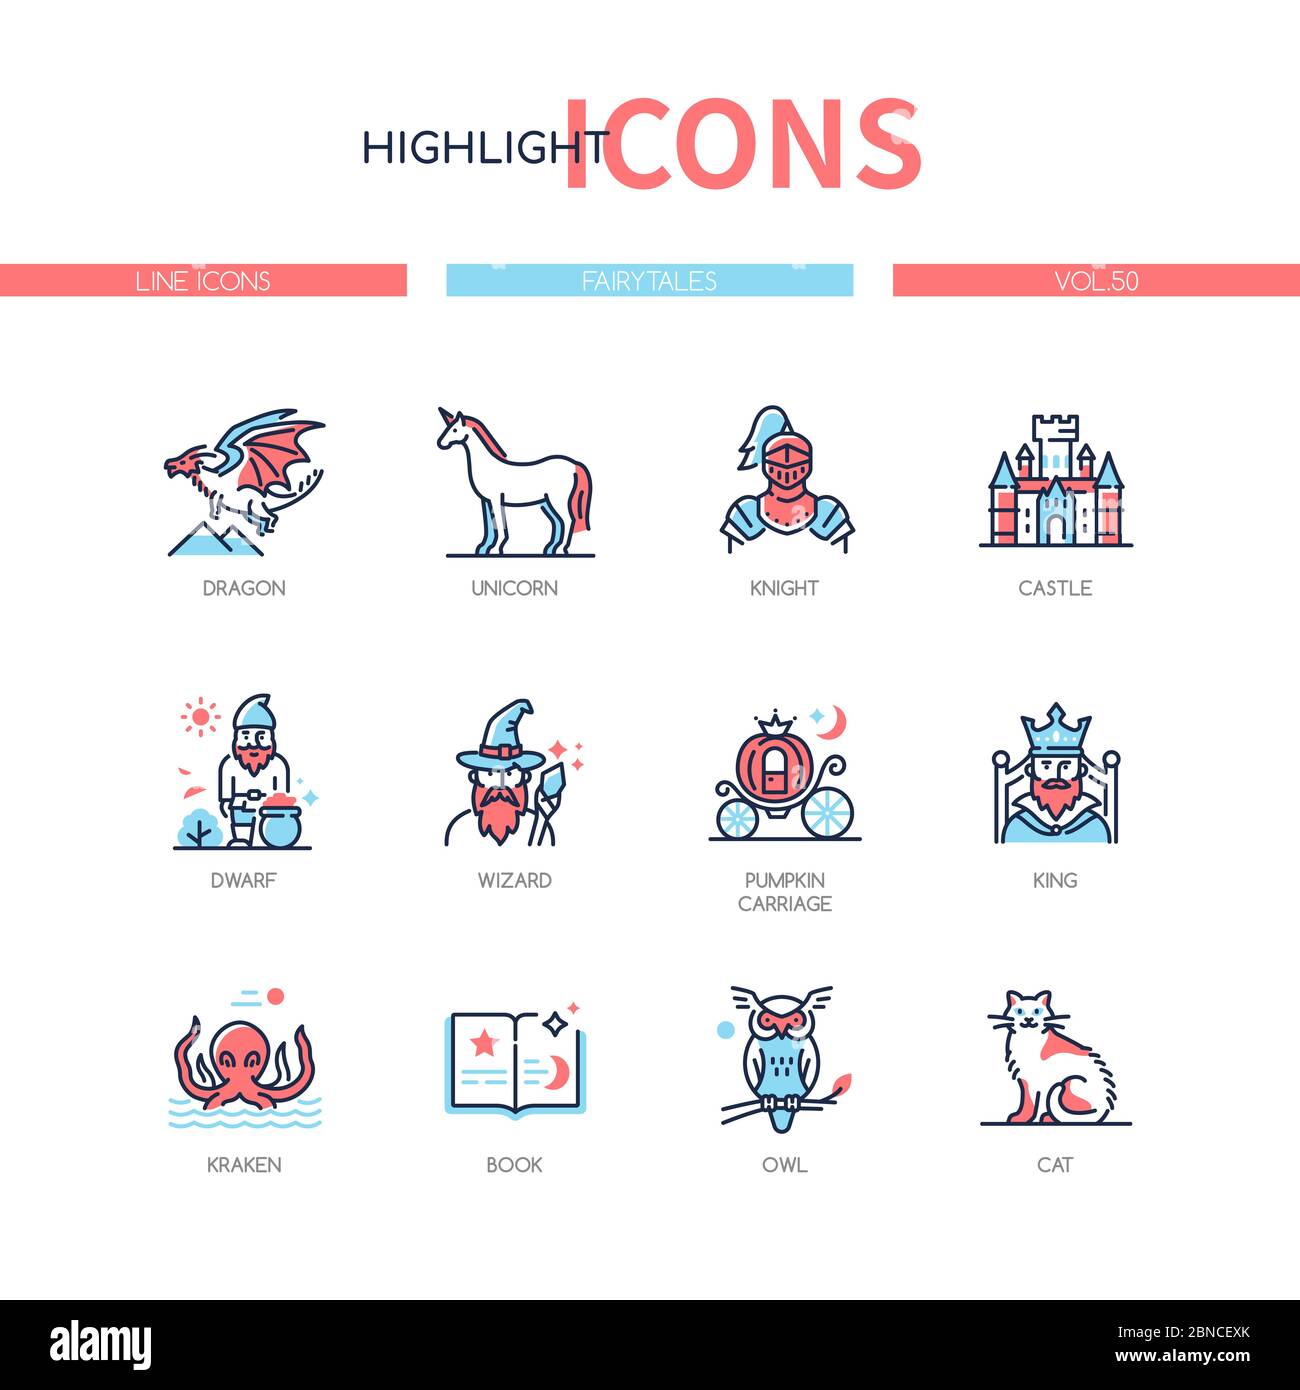 Fairytales concept - line design style icons set Stock Vector